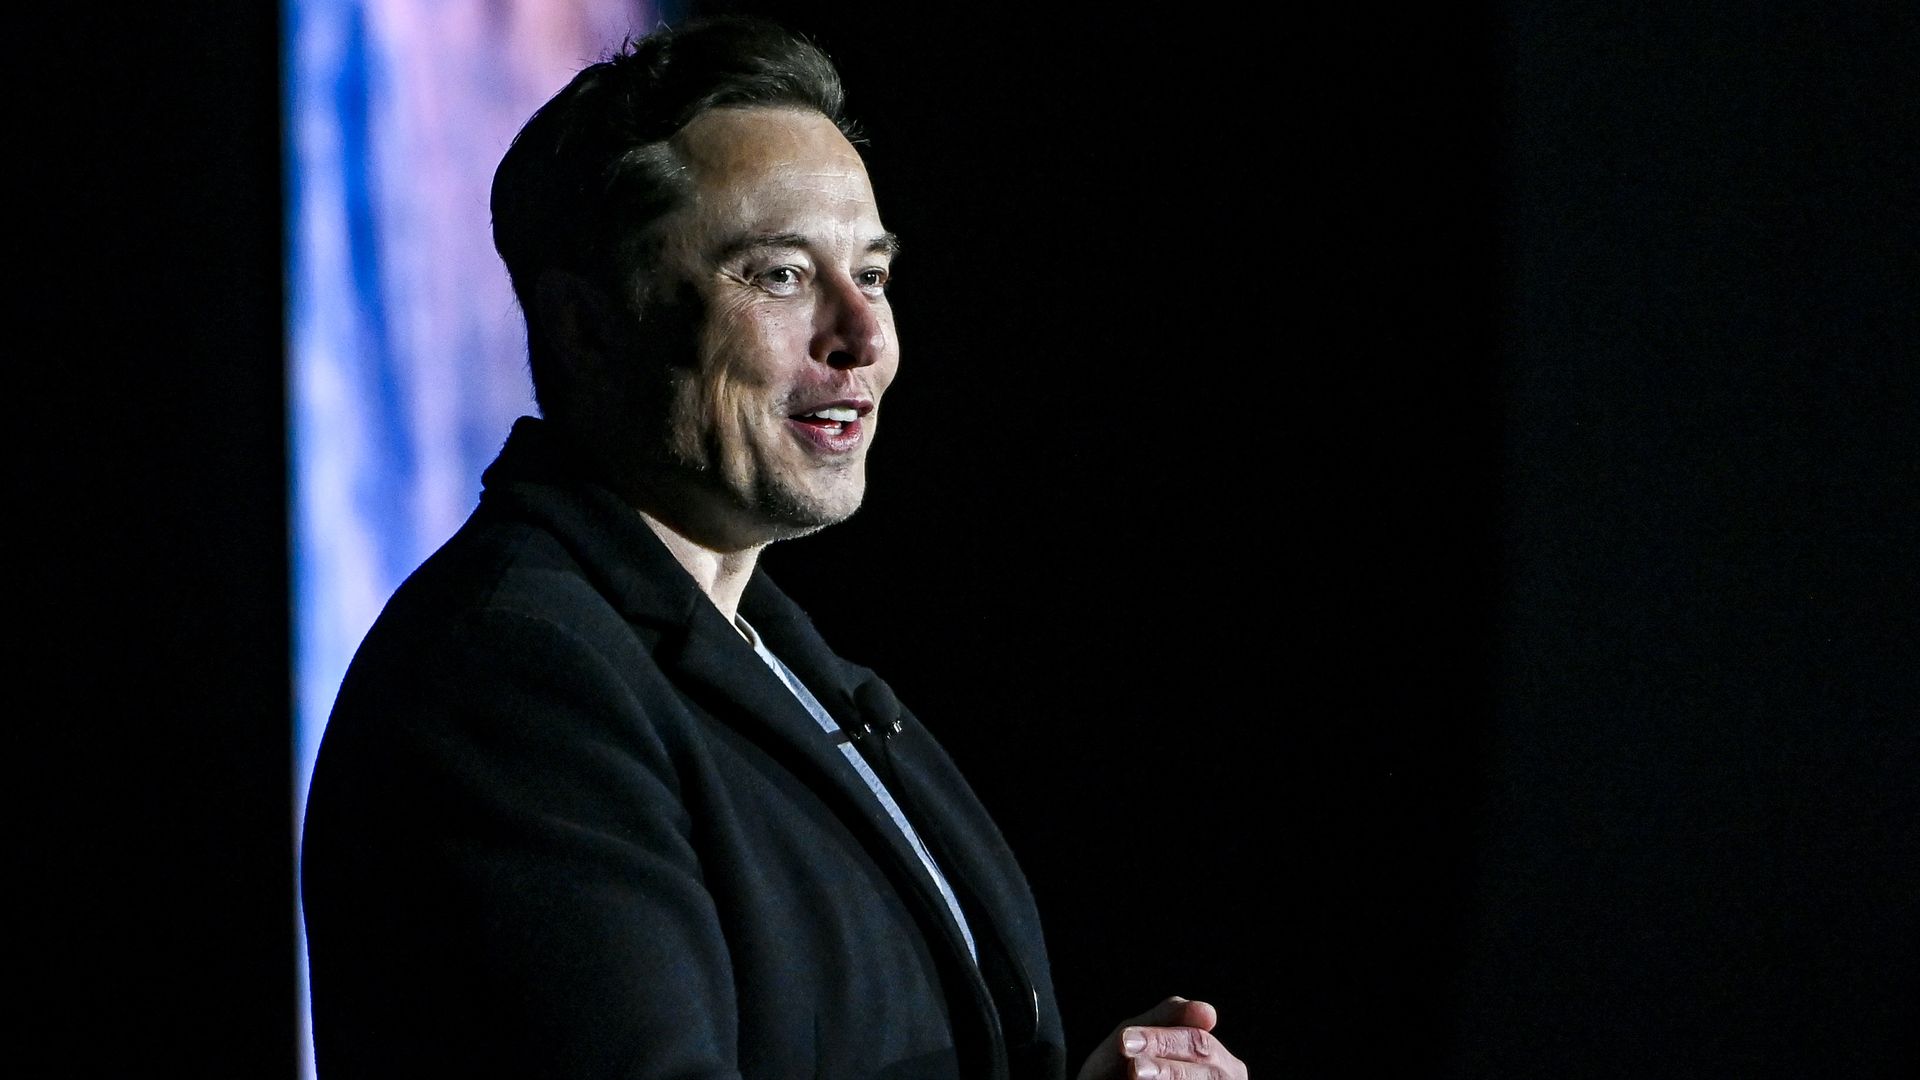 Elon Musk during a SpaceX presentation in Boca Chica, Texas, in February 2022.